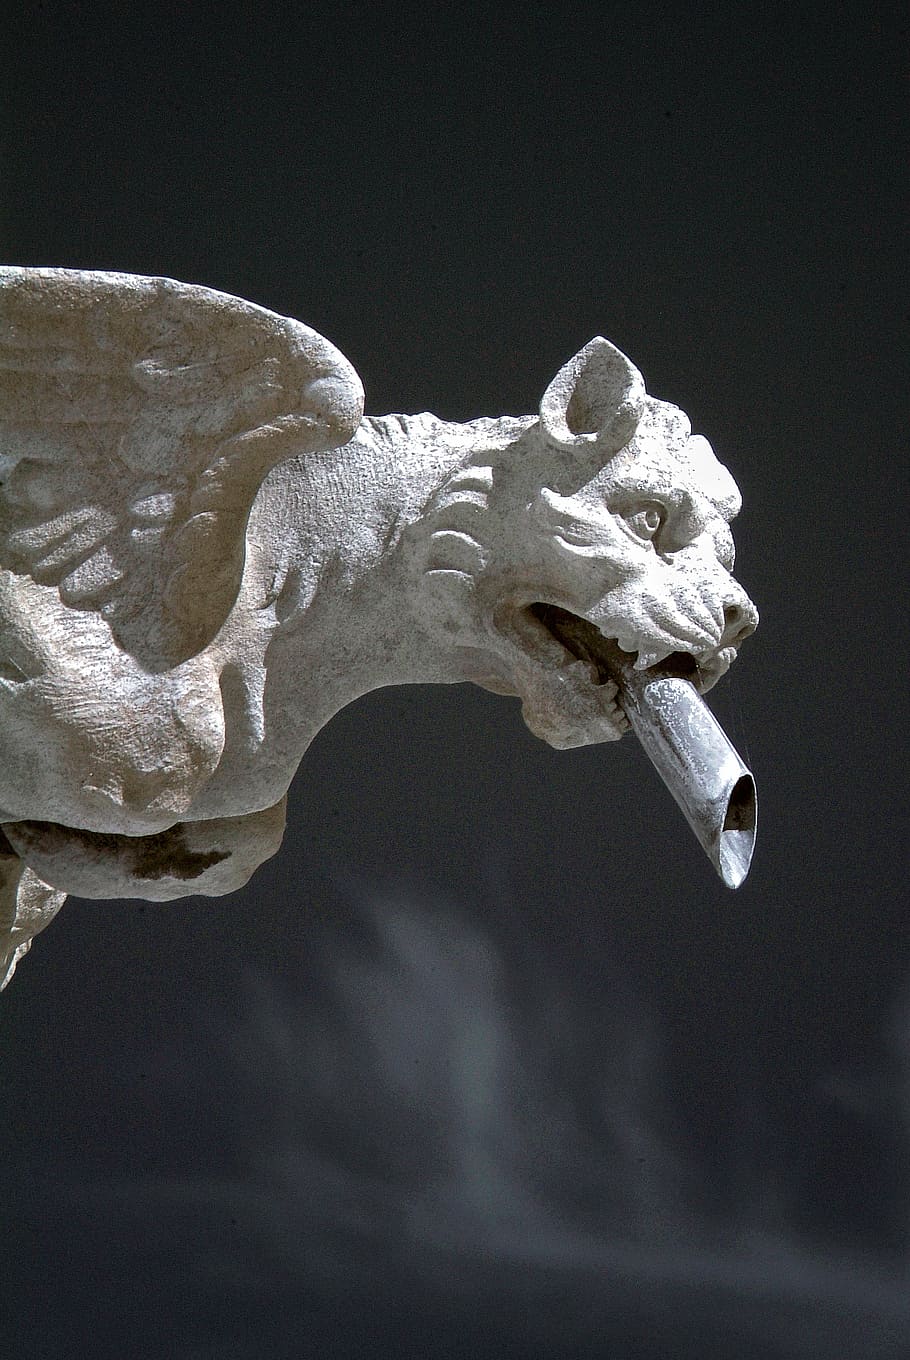 Gargoyle, Carved, Stone, Grotesque, carved, stone, carving, gothic, statue, monster, architecture